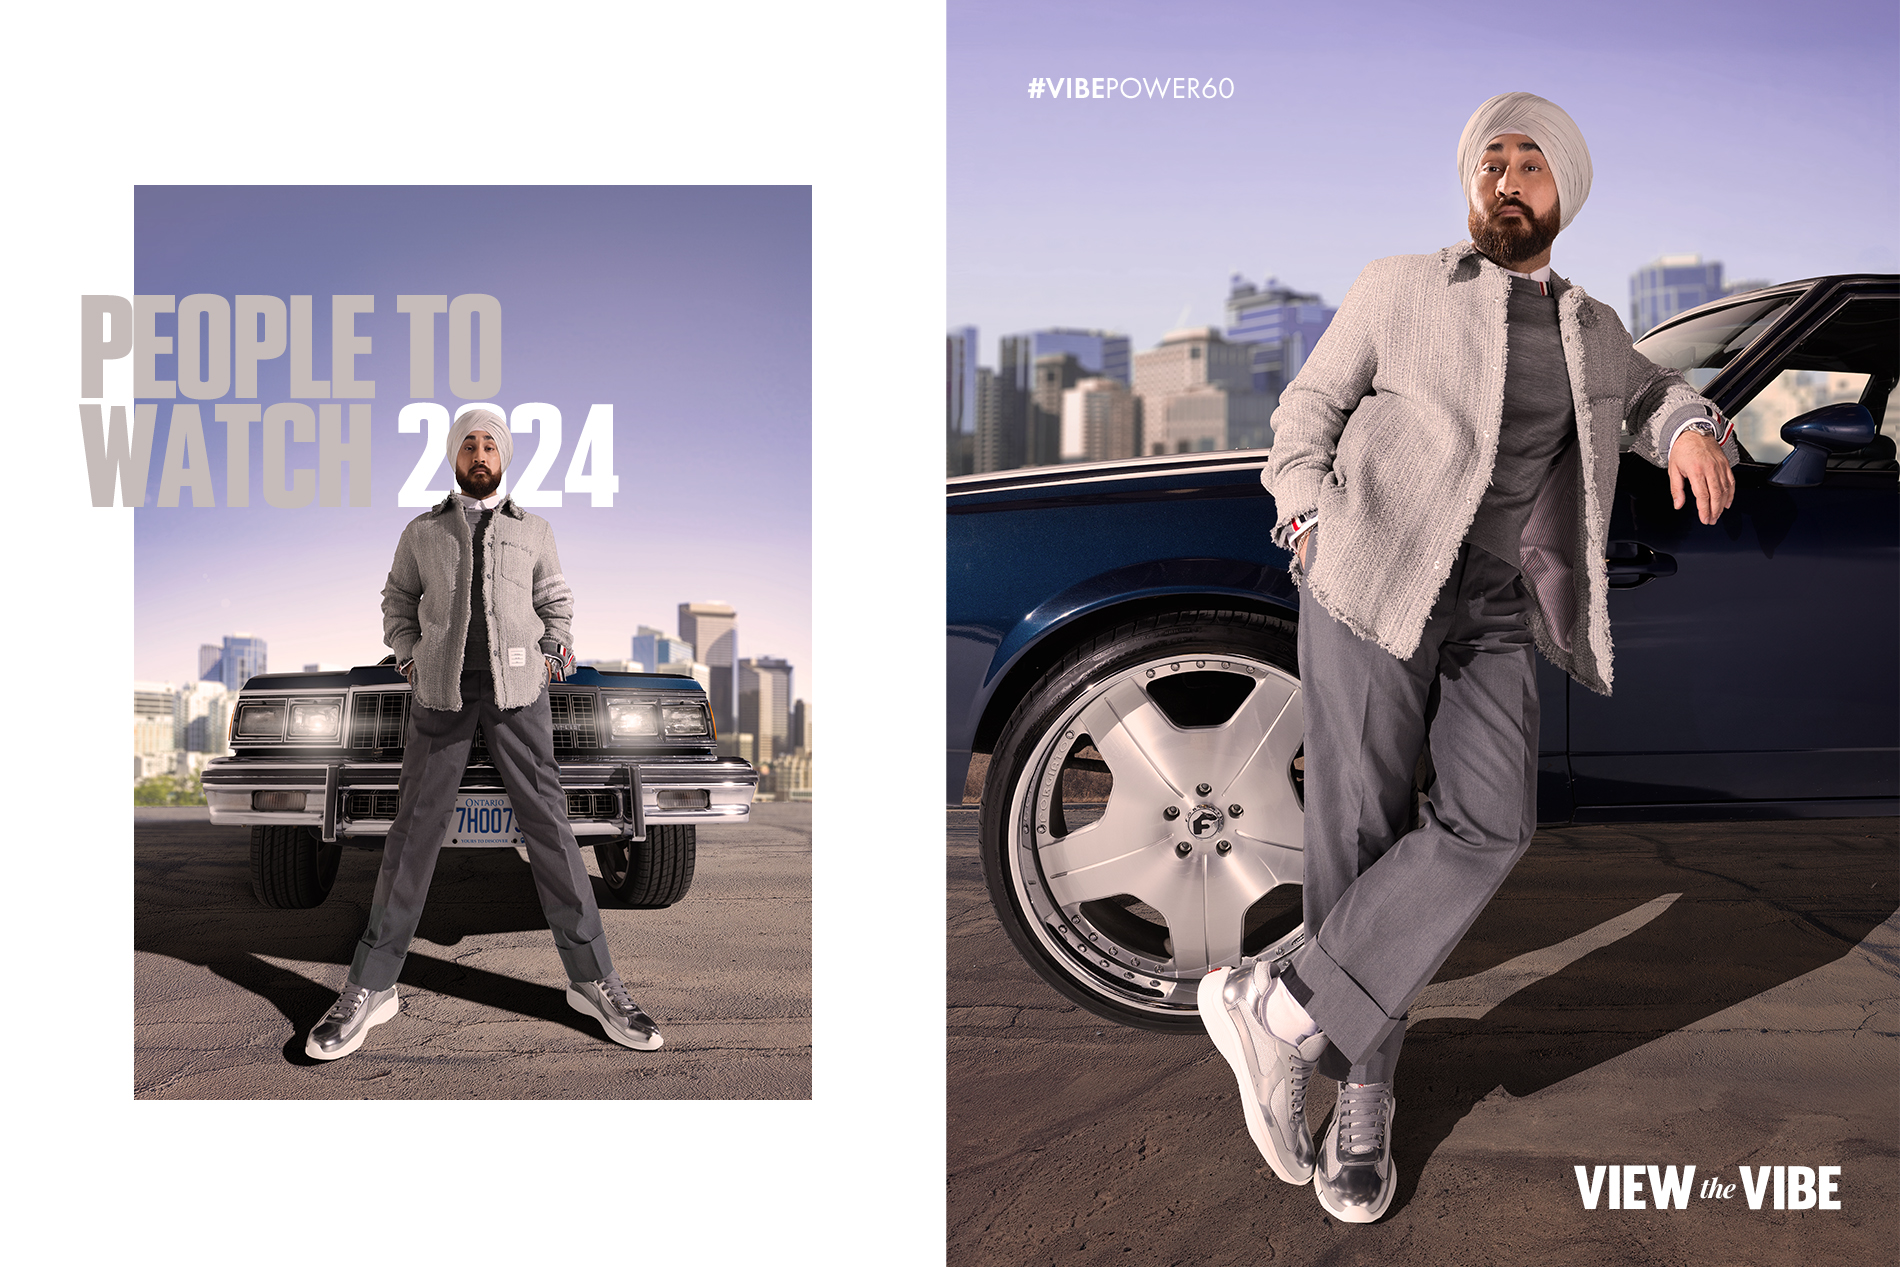 Jus Reign Jasmeet Raina Late Bloomer Crave new tv series Power 60 list View the VIBE People to Watch 2024 wearing Thom Browne from Harry Rosen Canada